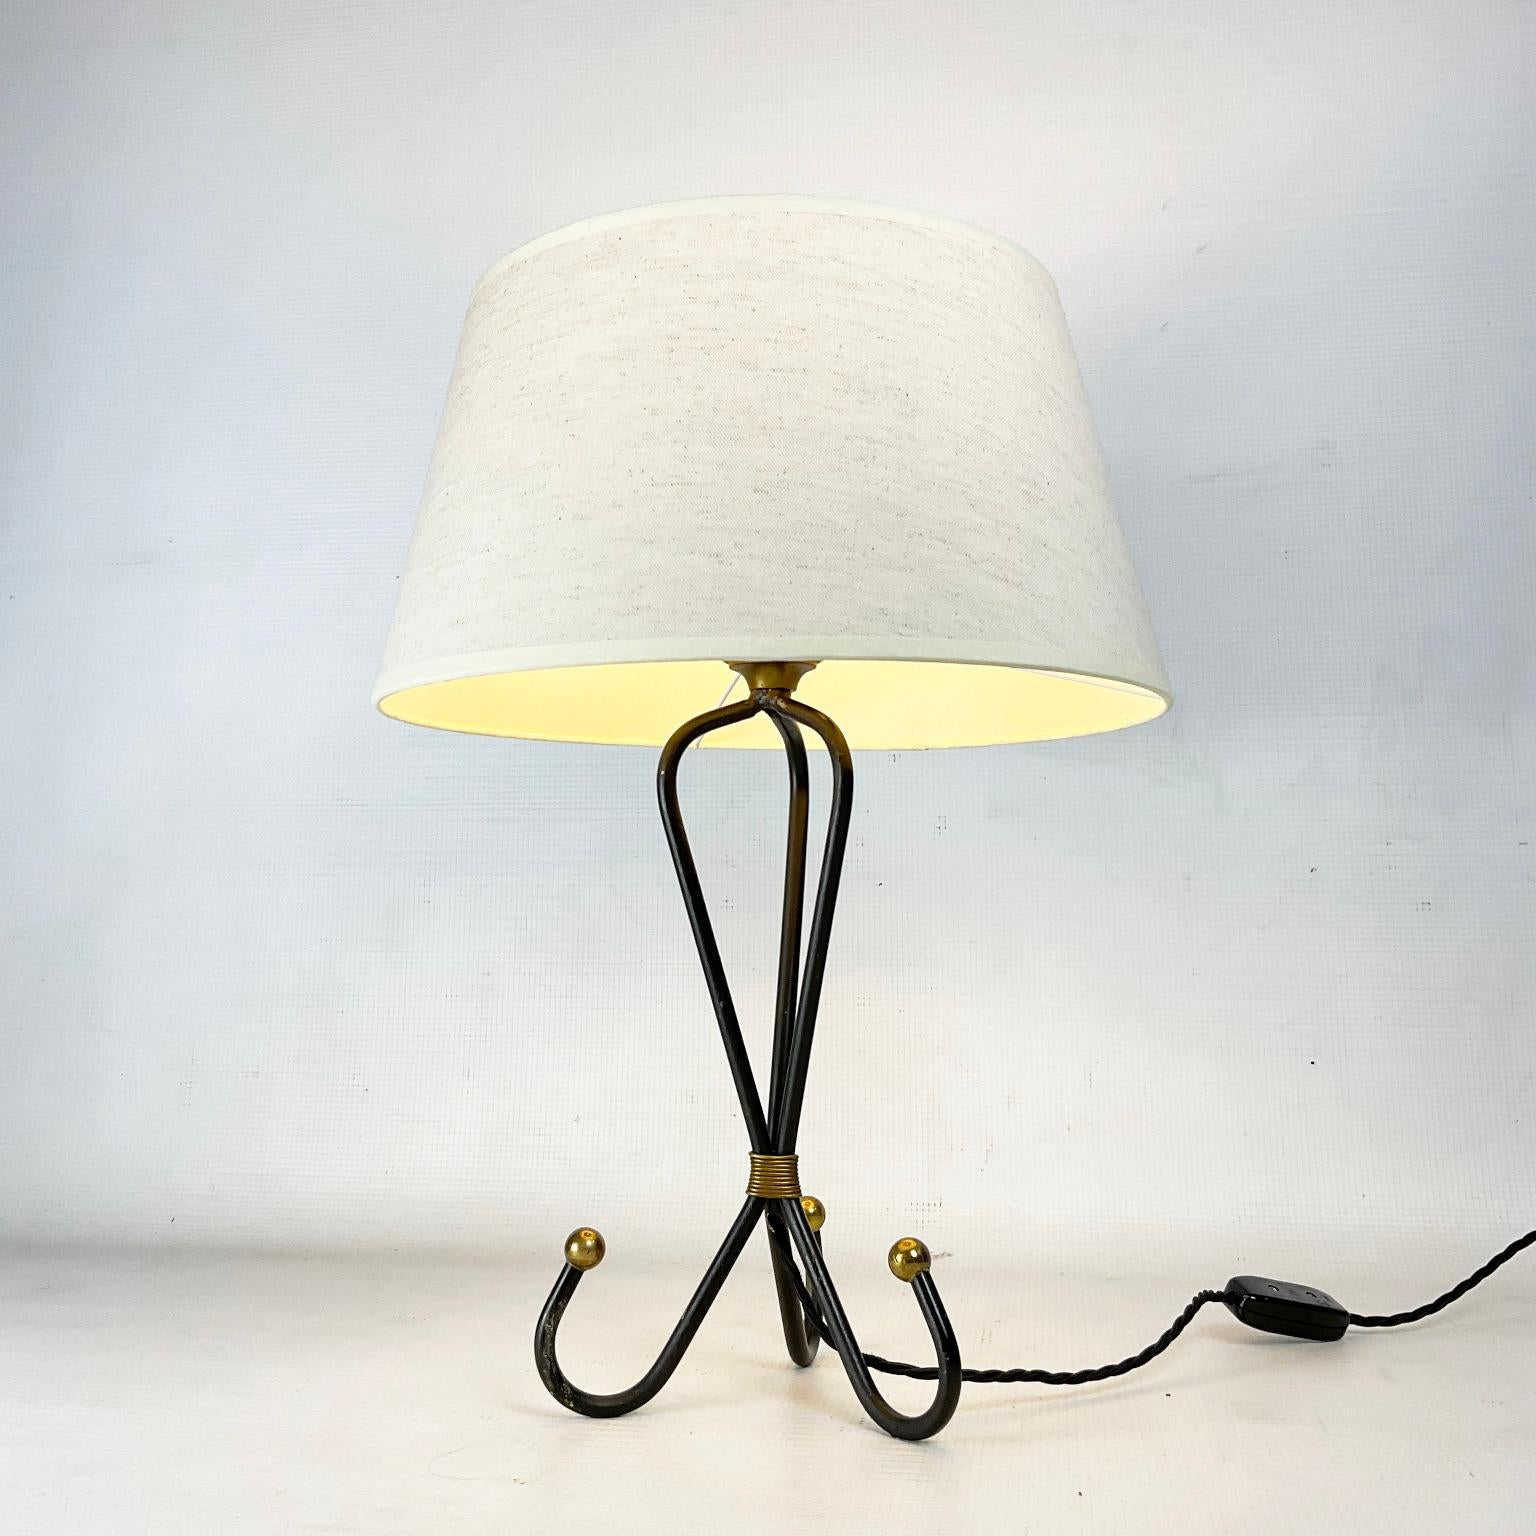 20th Century 1950s Table Lamp Wrought Iron and Brass Finish